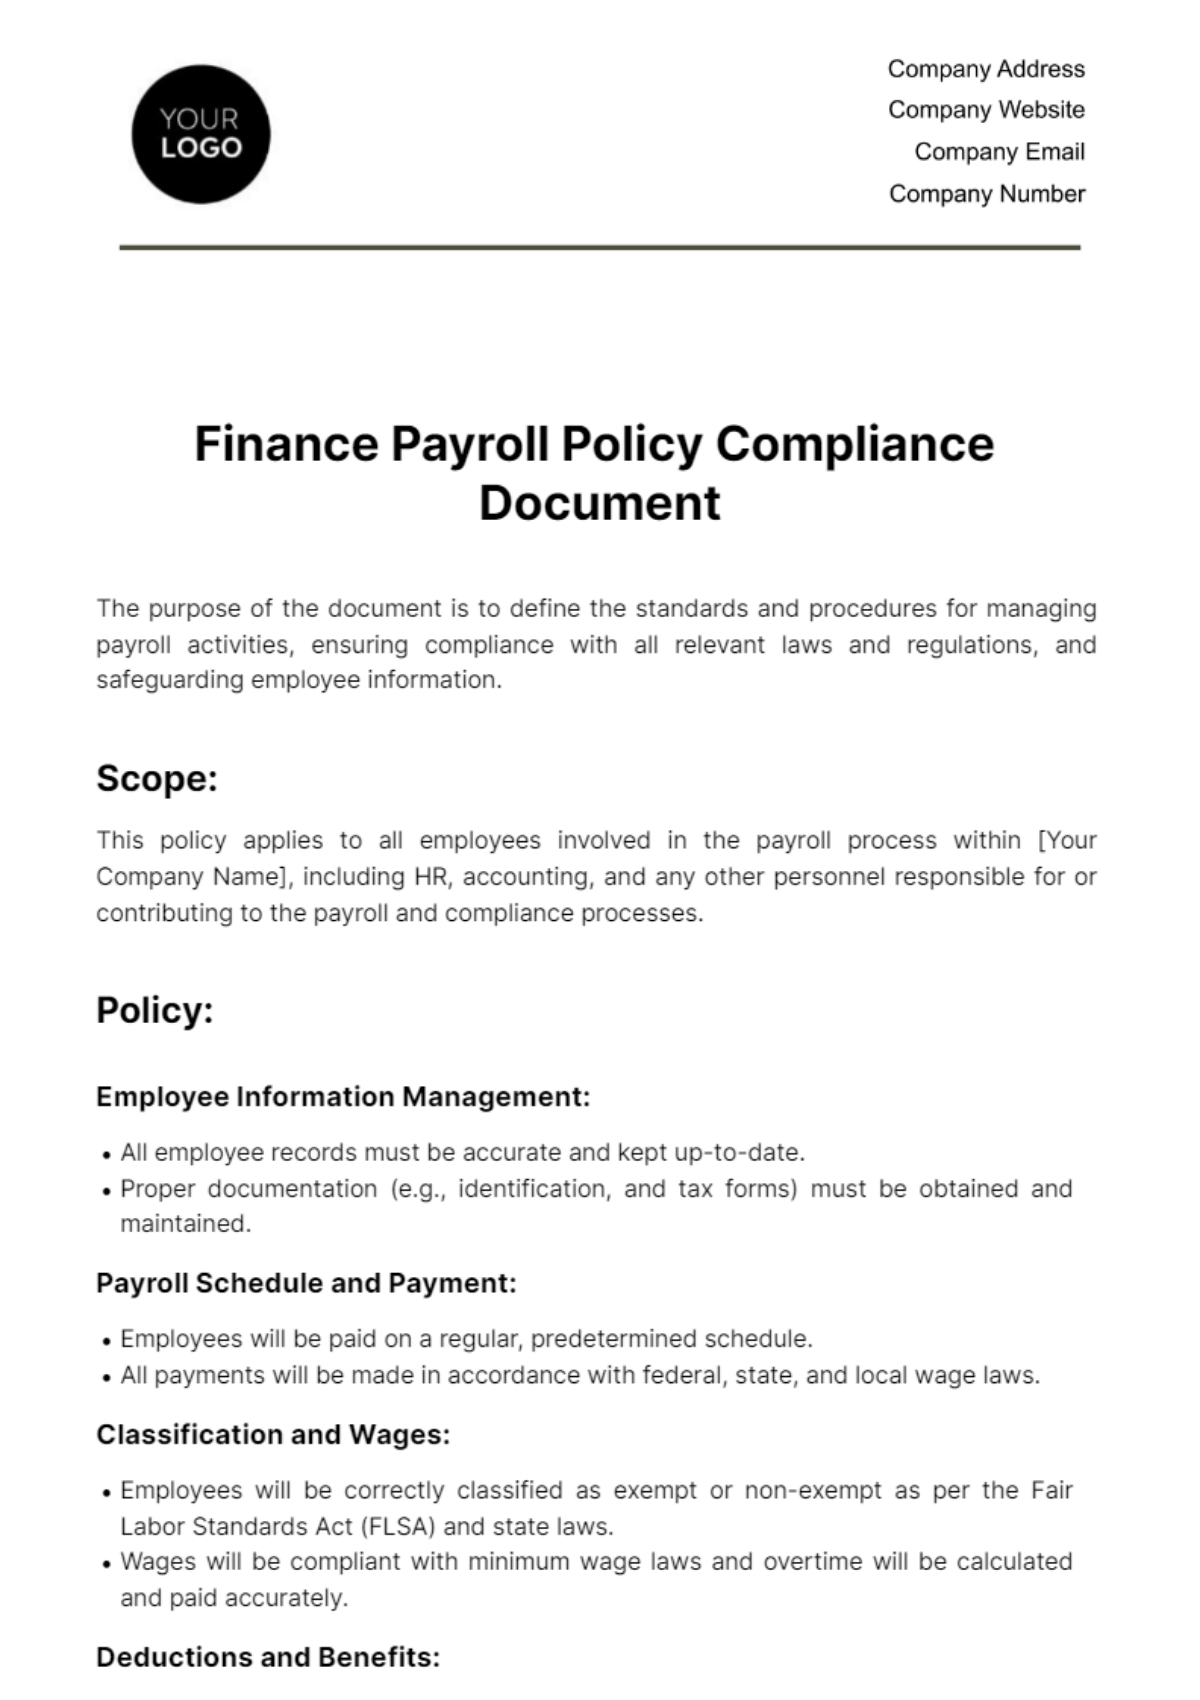 Finance Payroll Policy Compliance Document Template